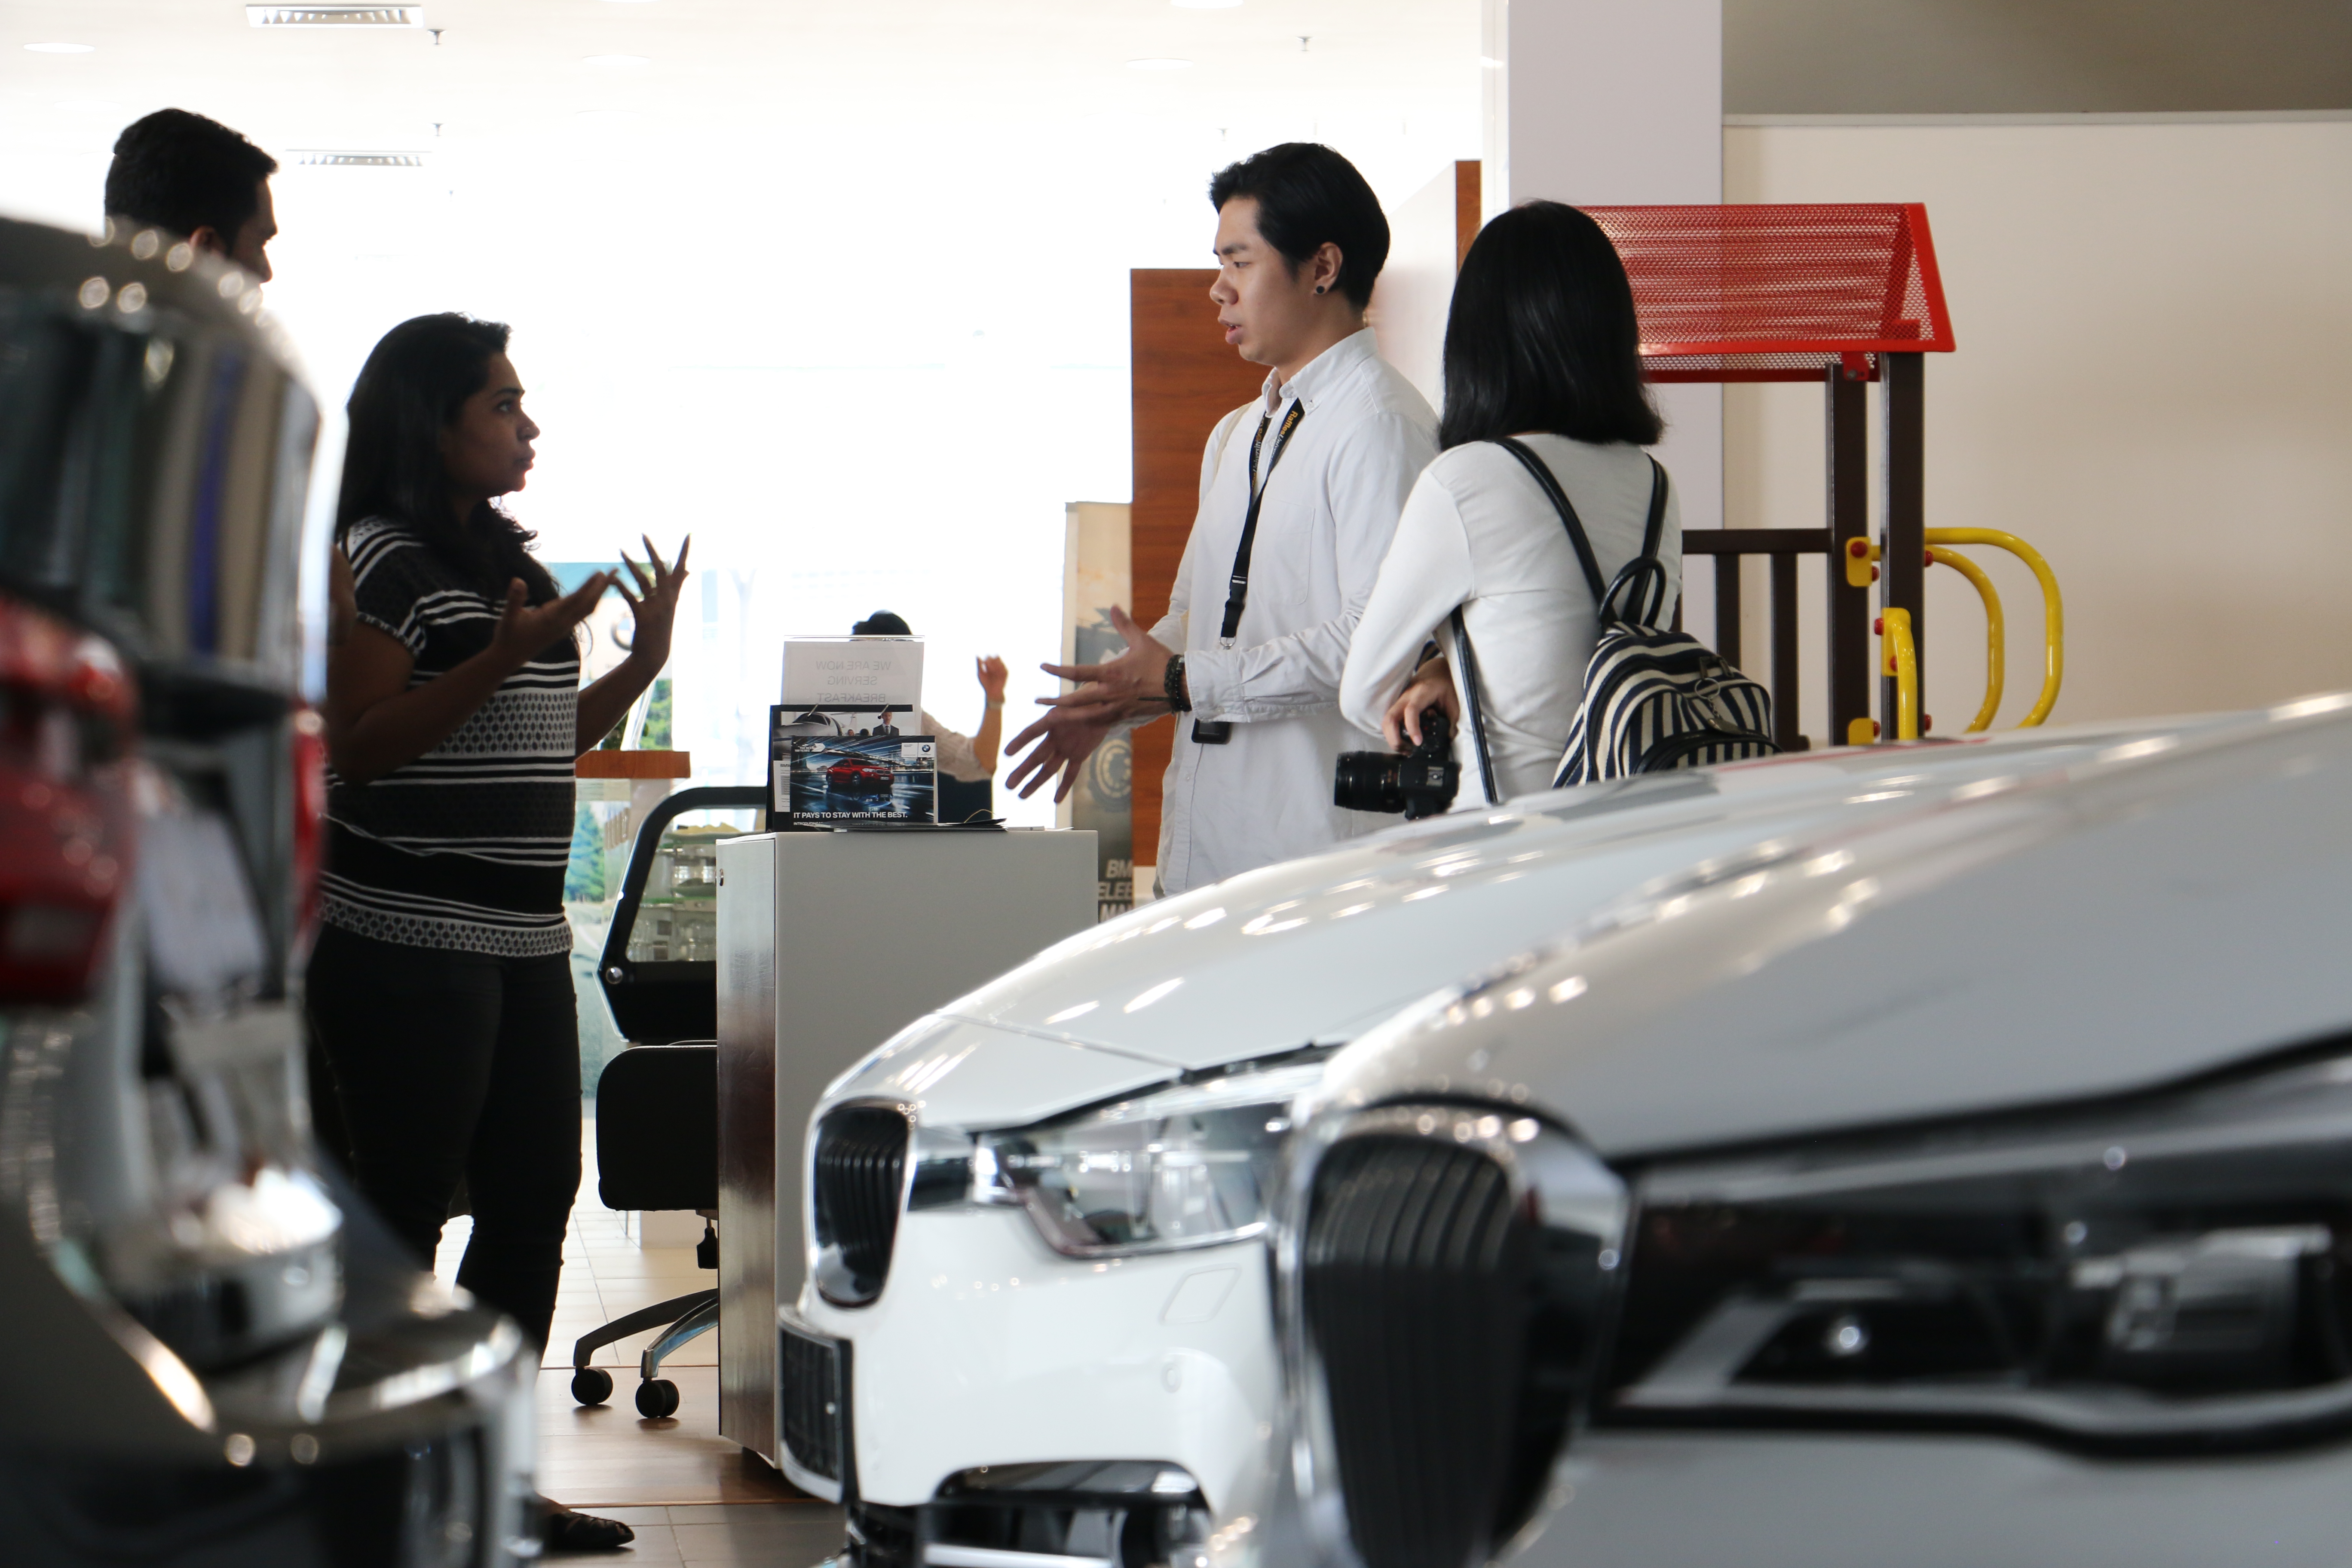 Our Design students recently collaborated with Wearnes Autohaus BMW Johor Bahru to come up with visuals for their Raya Open House